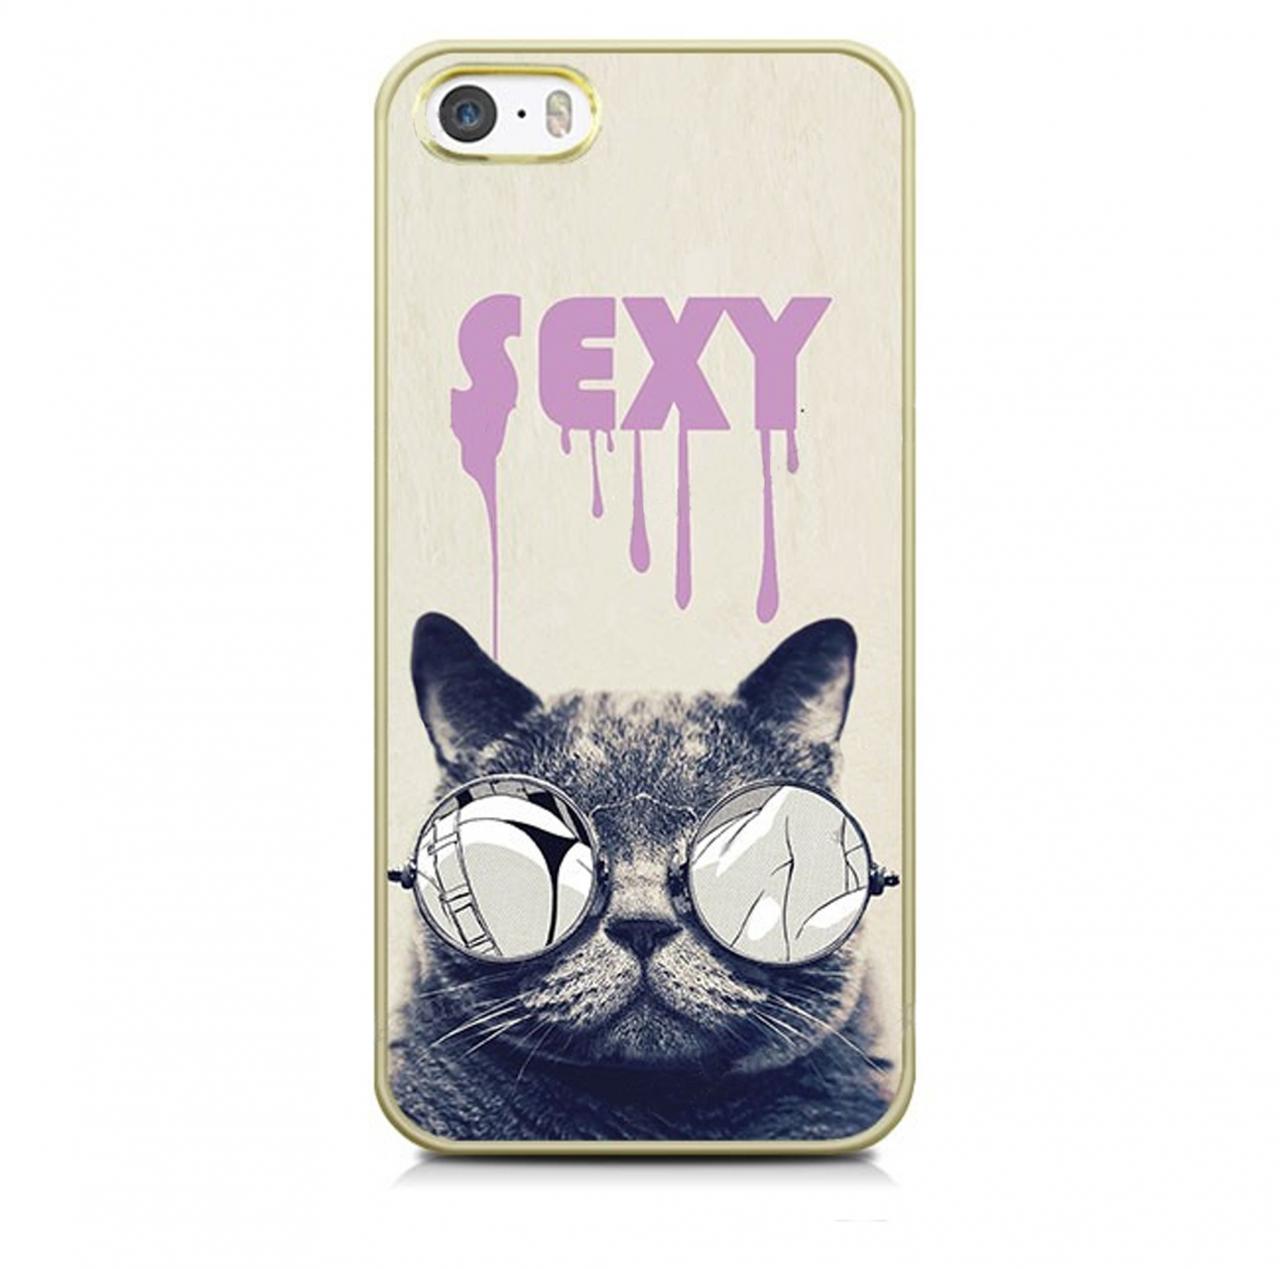 Sexy Cat With Glasses Protective Case For Iphone And Samsung Galaxy ( Screen Protector)